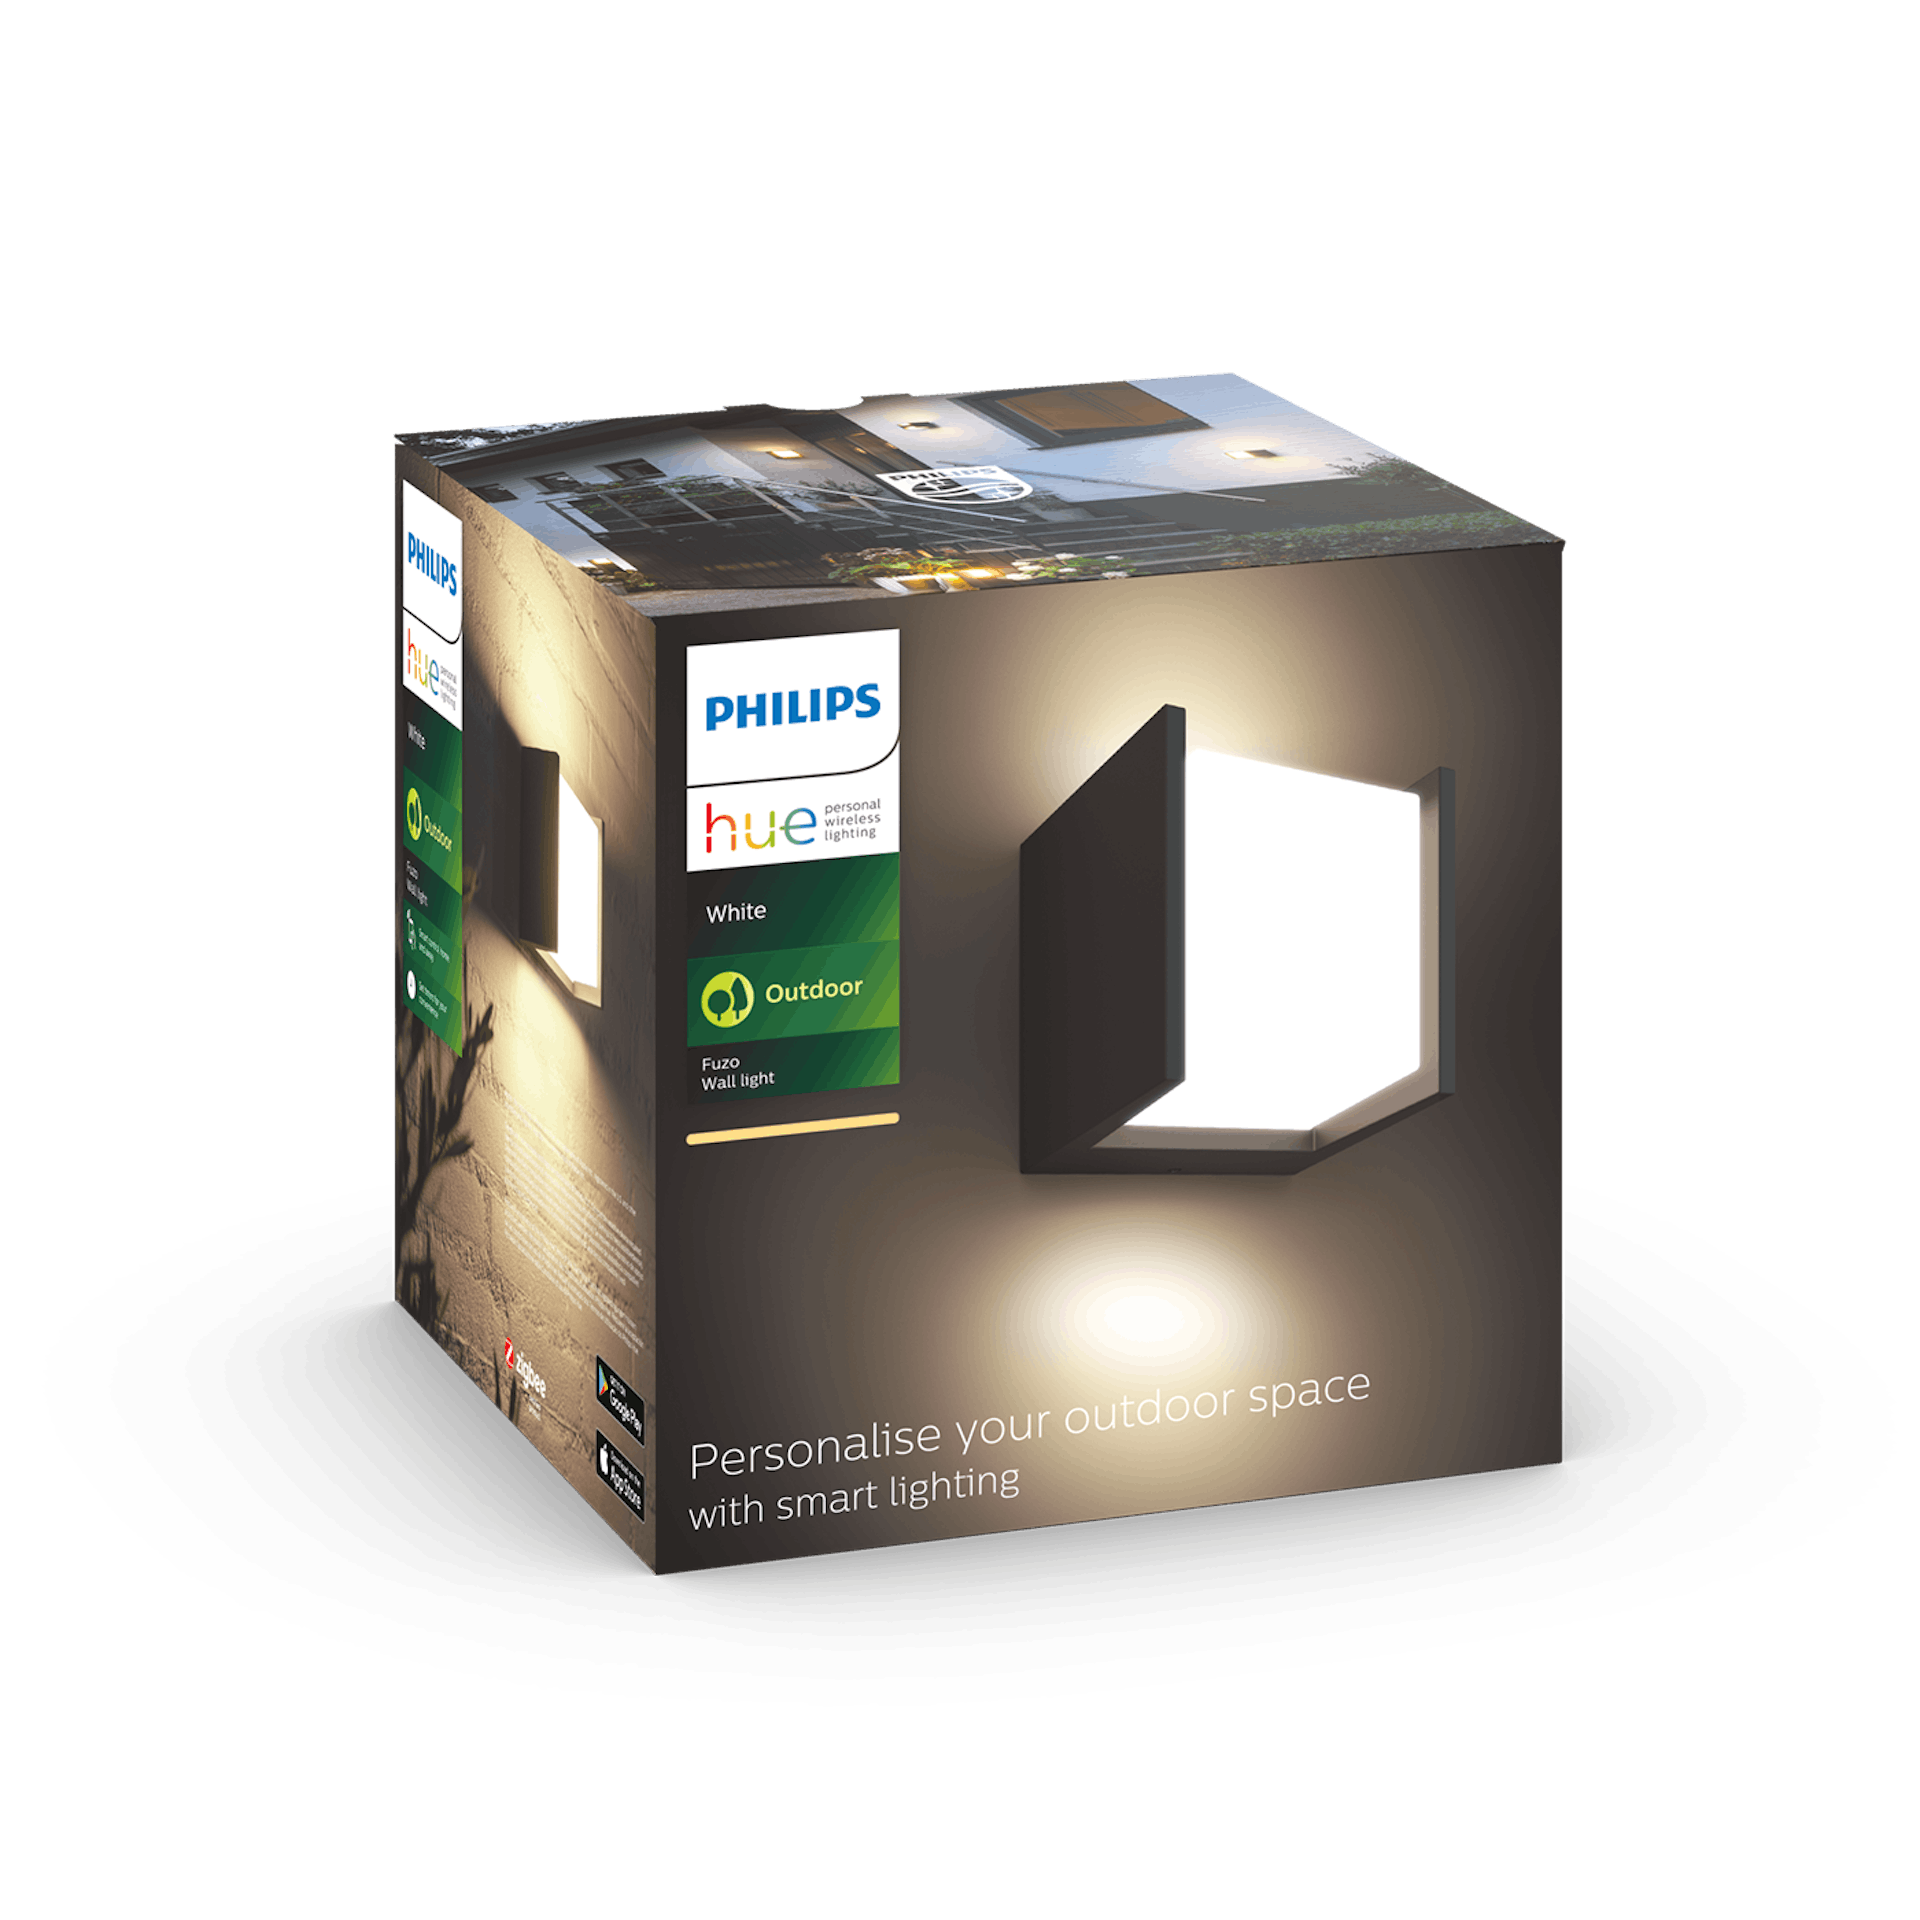 Philips Hue - Fuzo Square - Details - Package image 